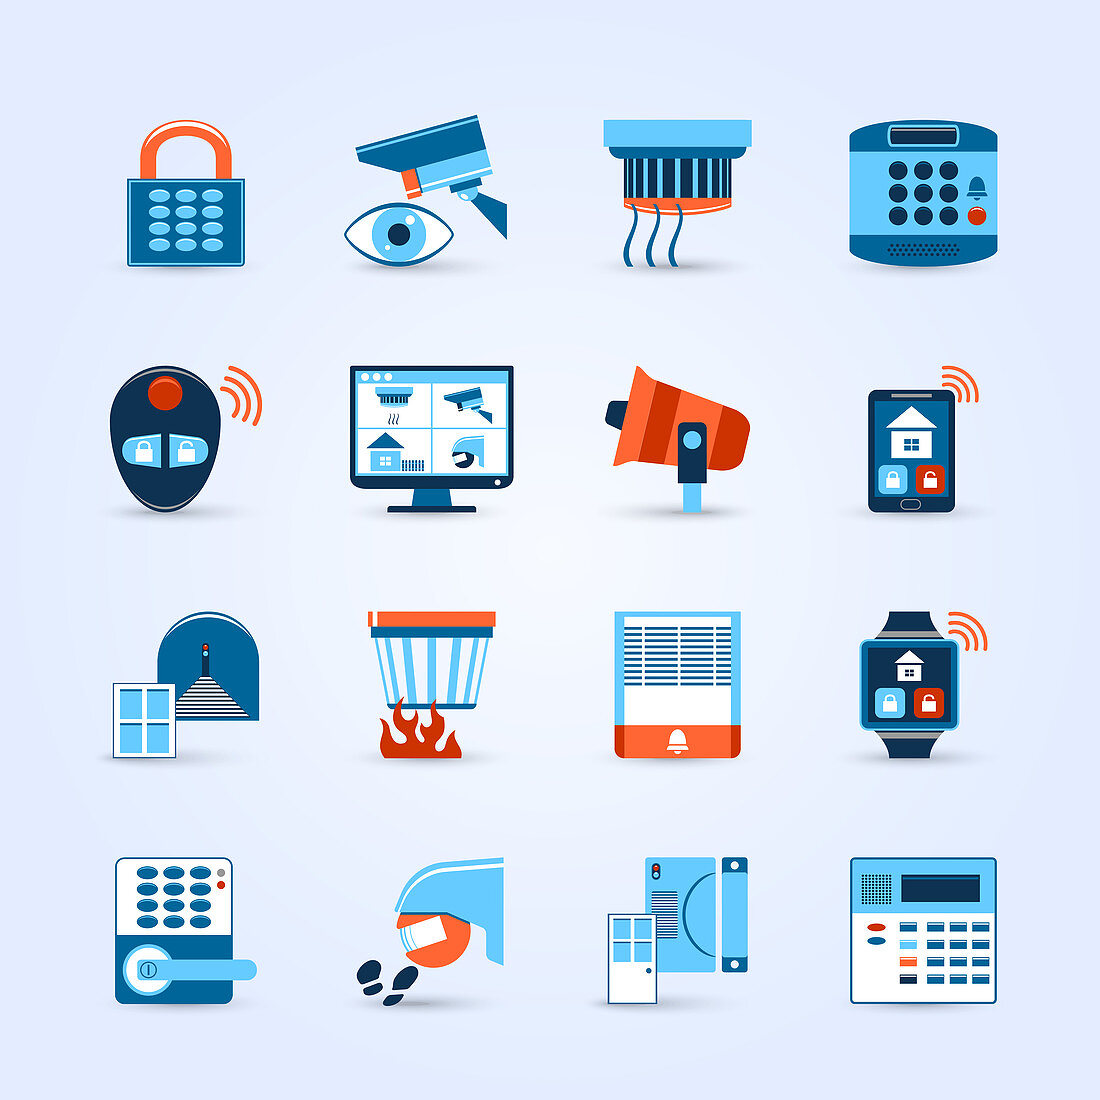 Home security icons, illustration